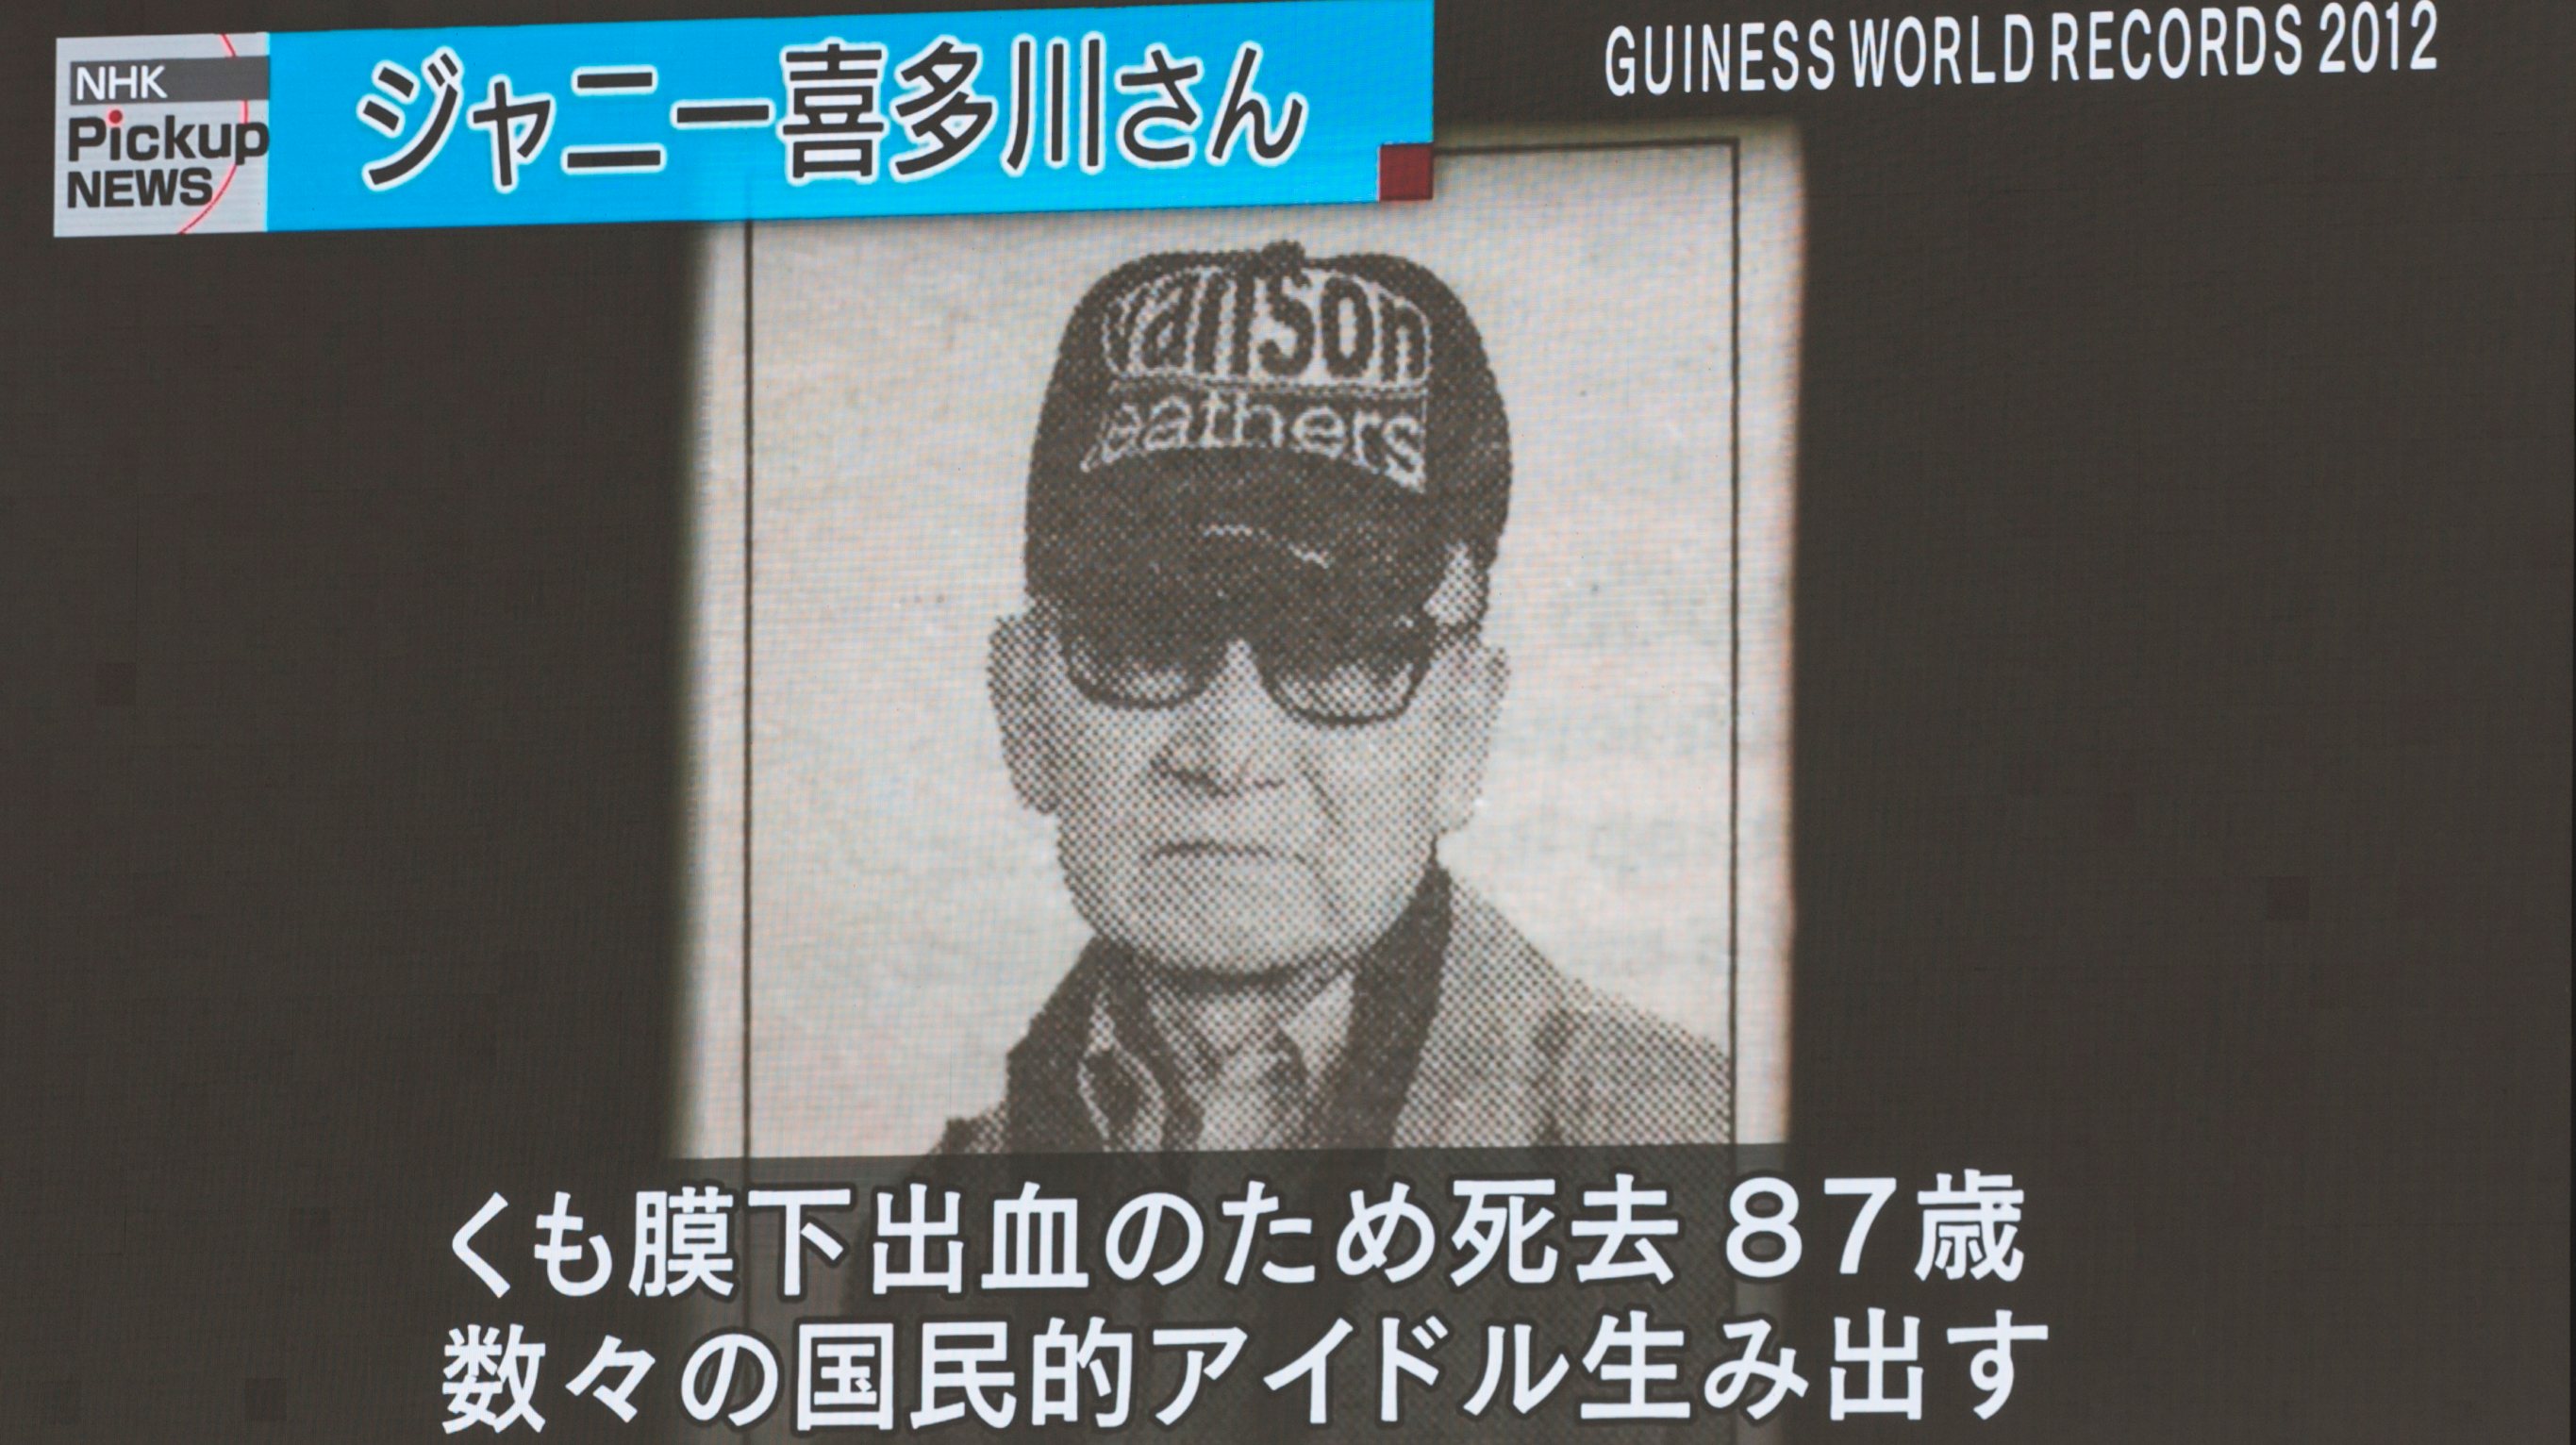 Who was Johnny Kitagawa, the millionaire “God” of Japanese pop and alleged sexual predator